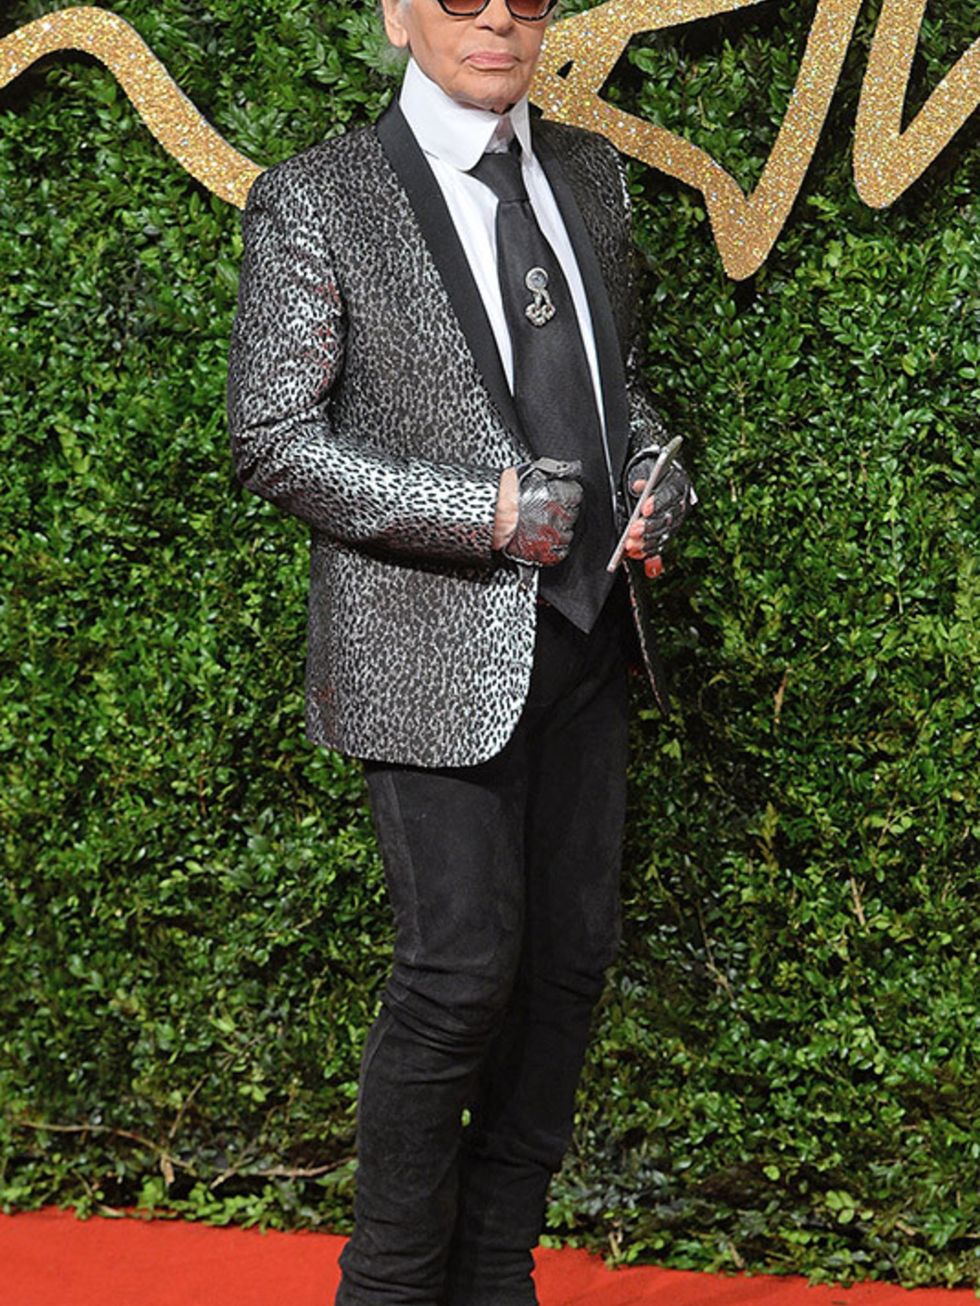 Karl Lagerfeld attends the British Fashion Awards in London, November 2015.